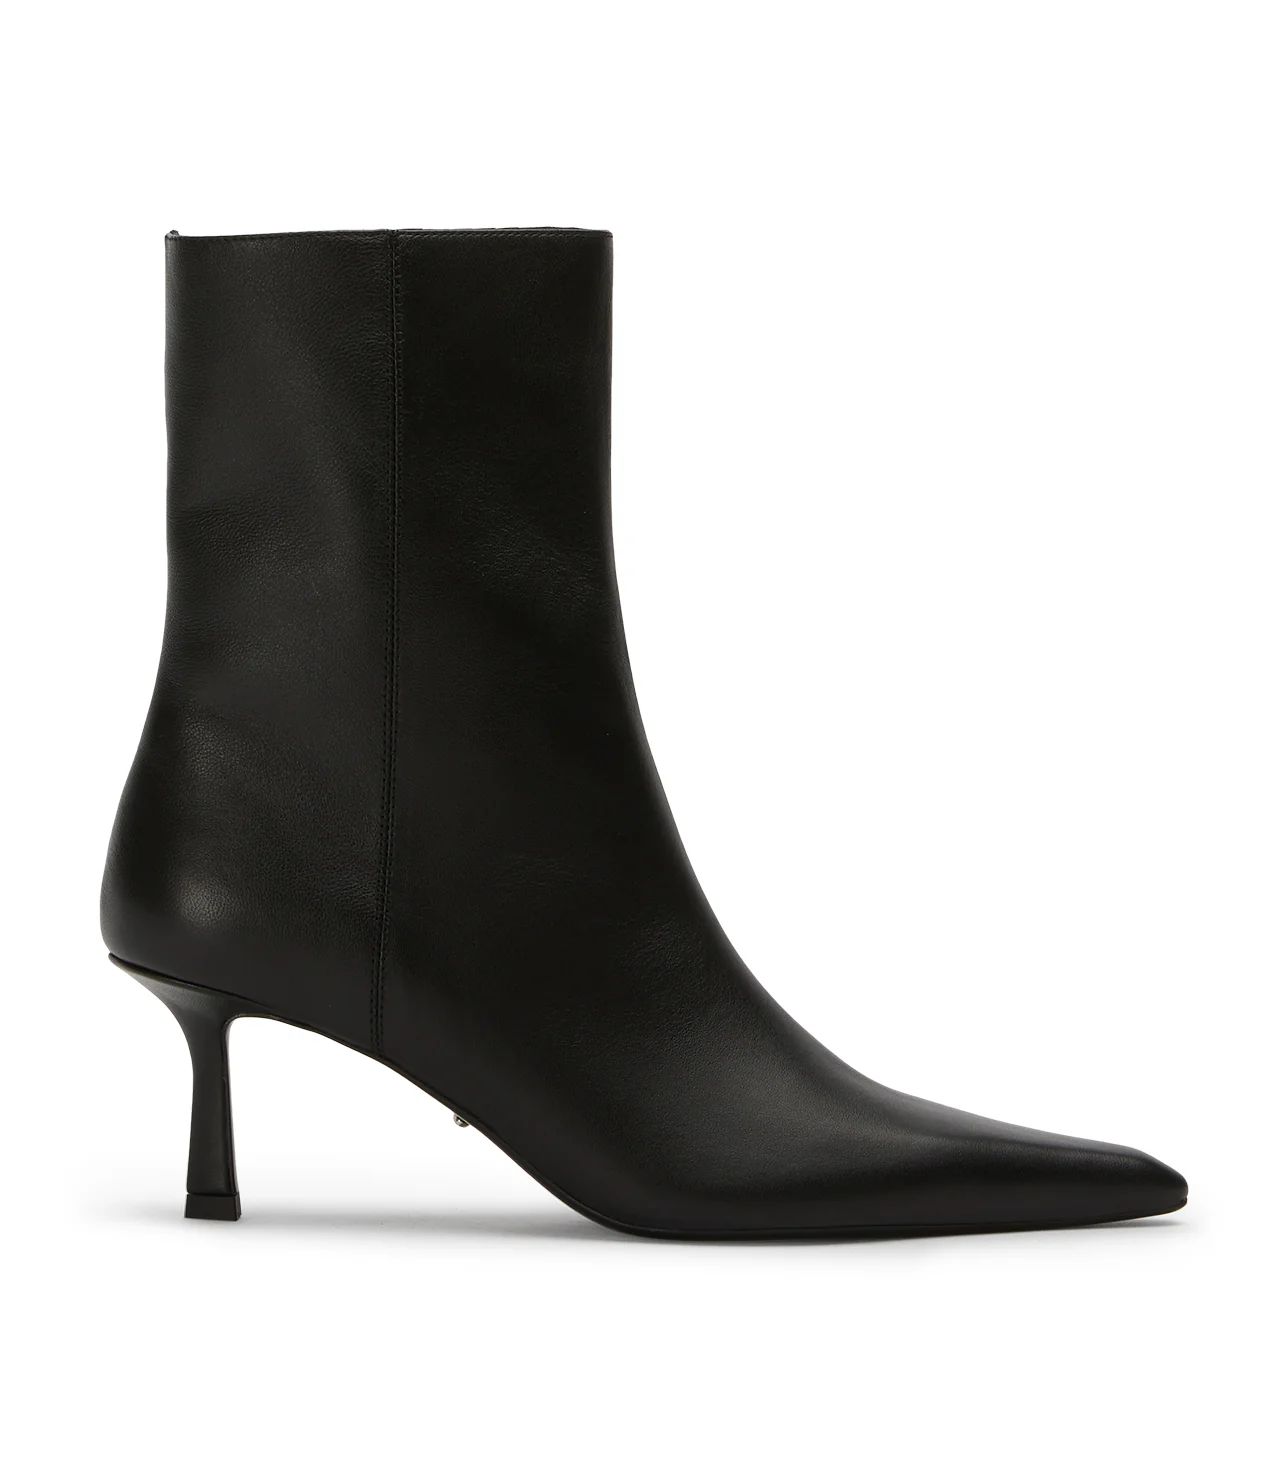 Quincy Black Nappa Ankle Boots | Tony Bianco US